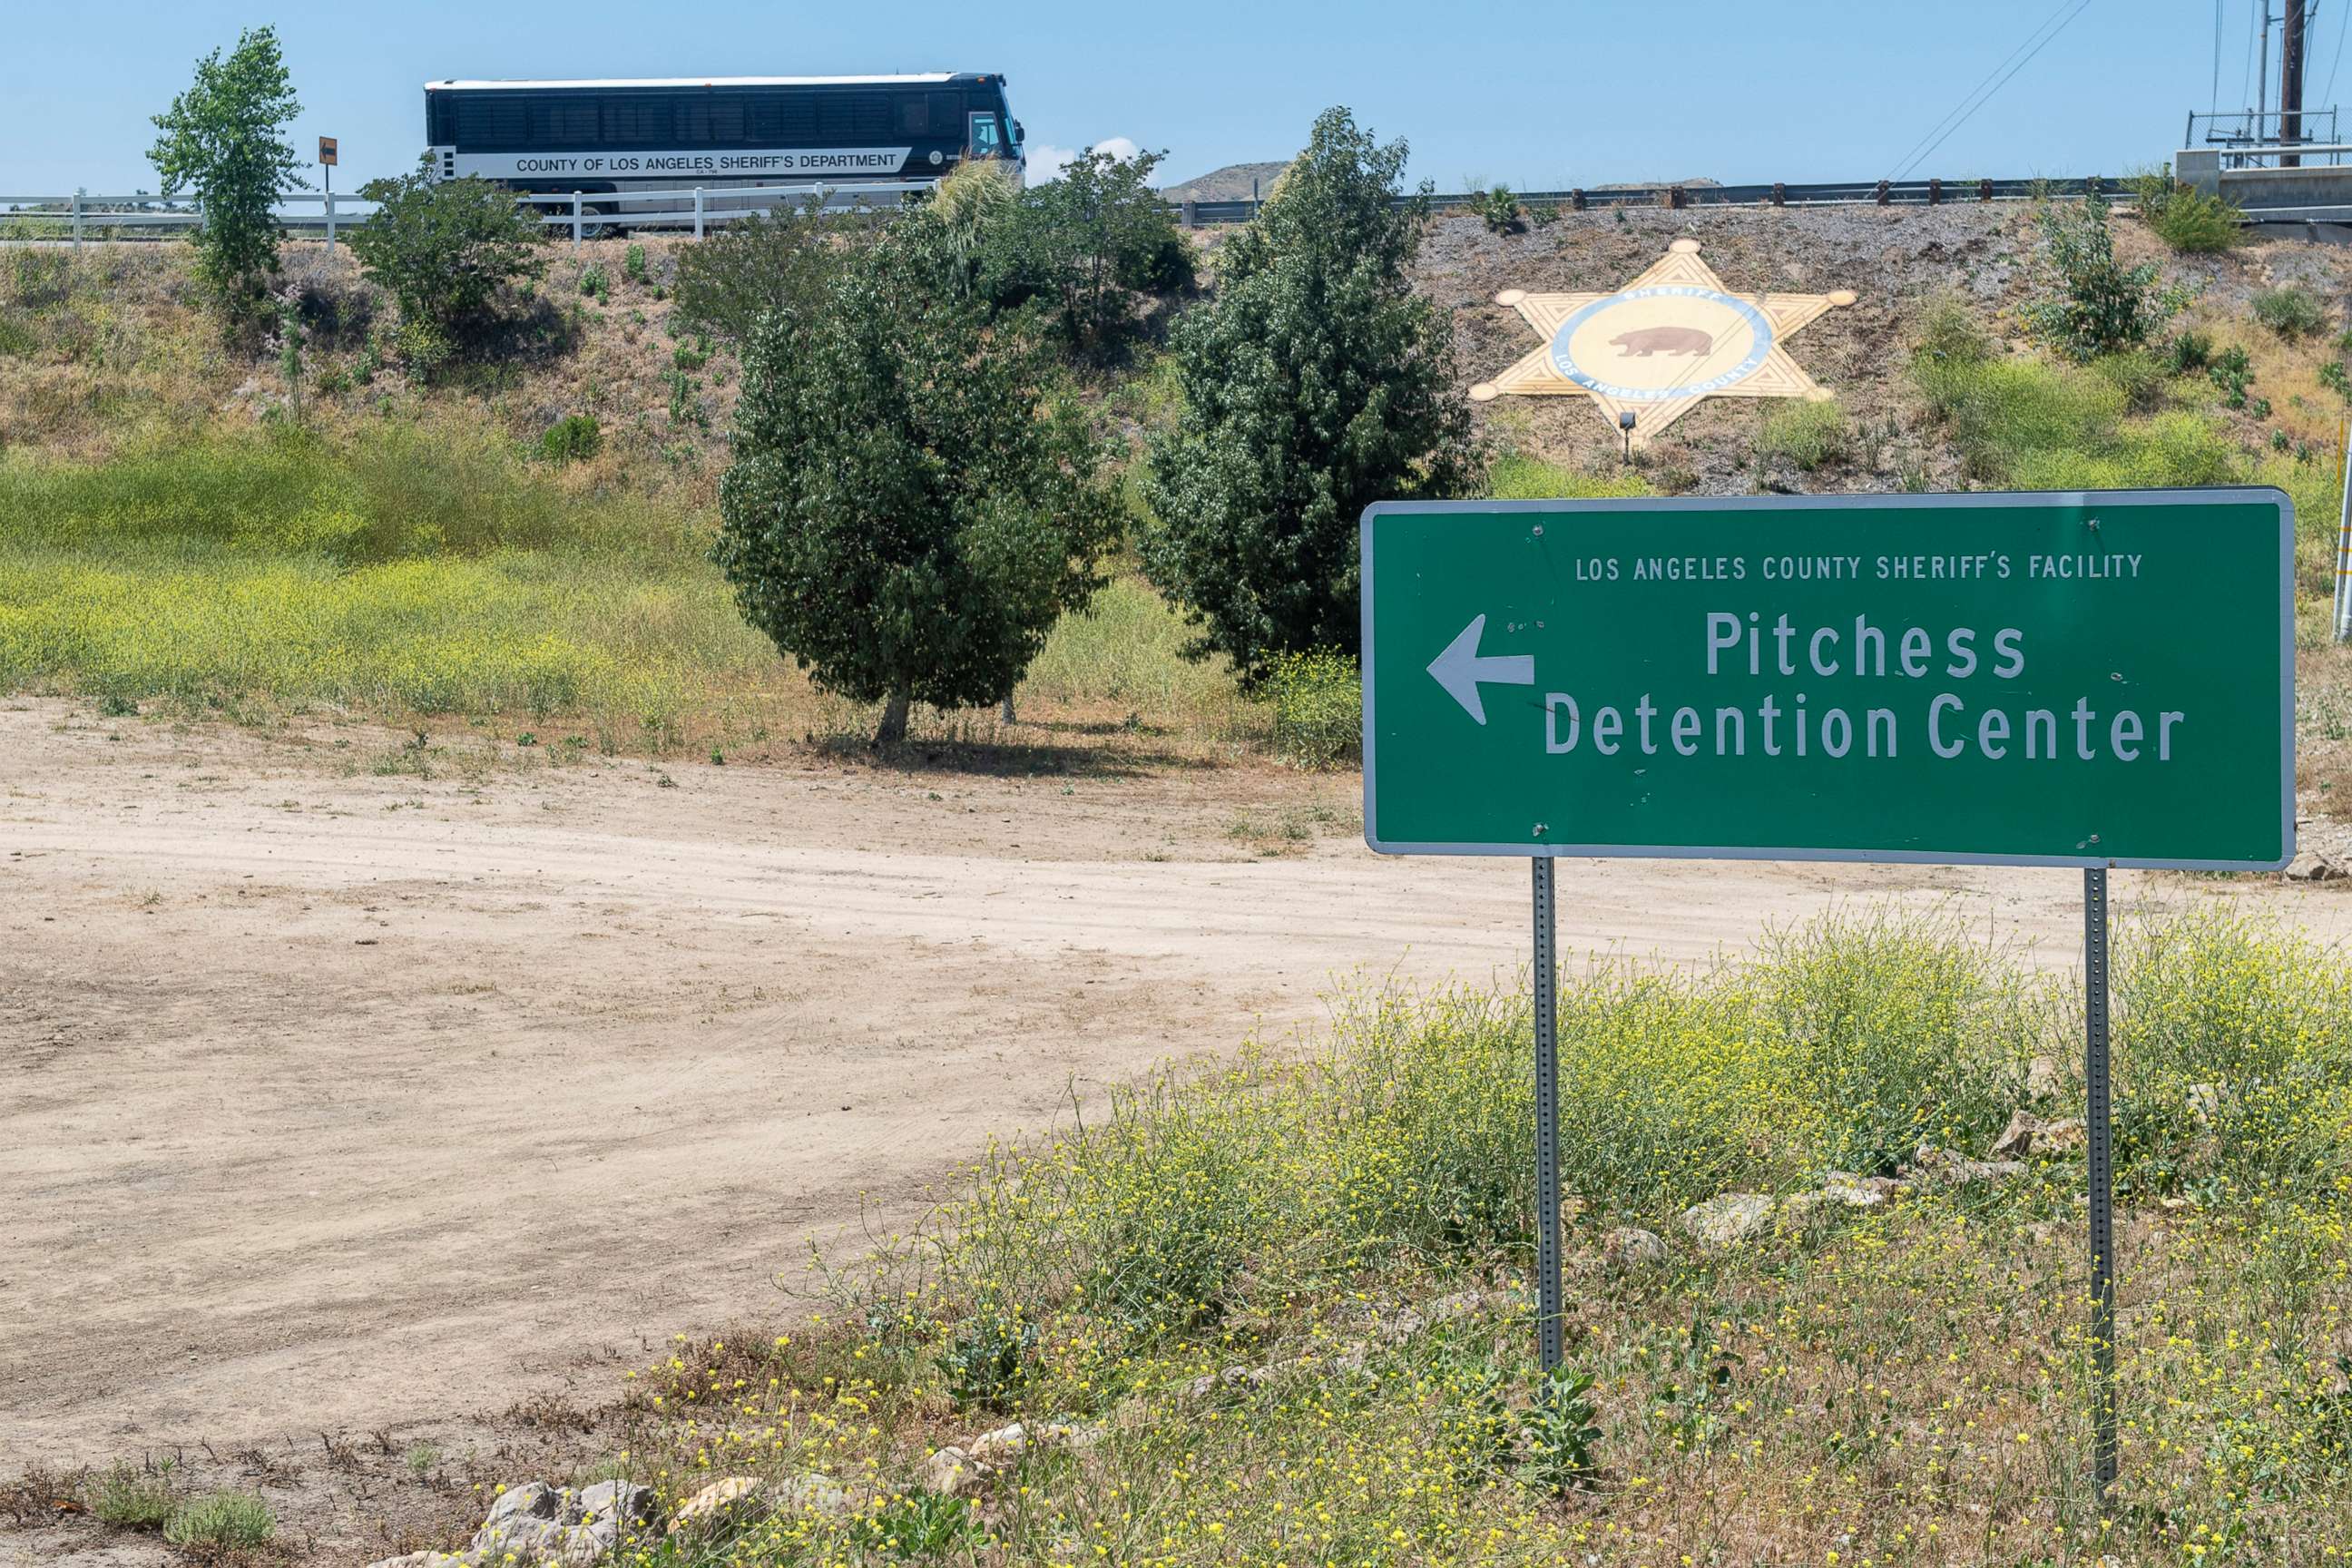 PHOTO: In this May 12, 2020, file photo, a sign for the Peter J. Pitchess Detention Center is shown in Castaic, Calif.